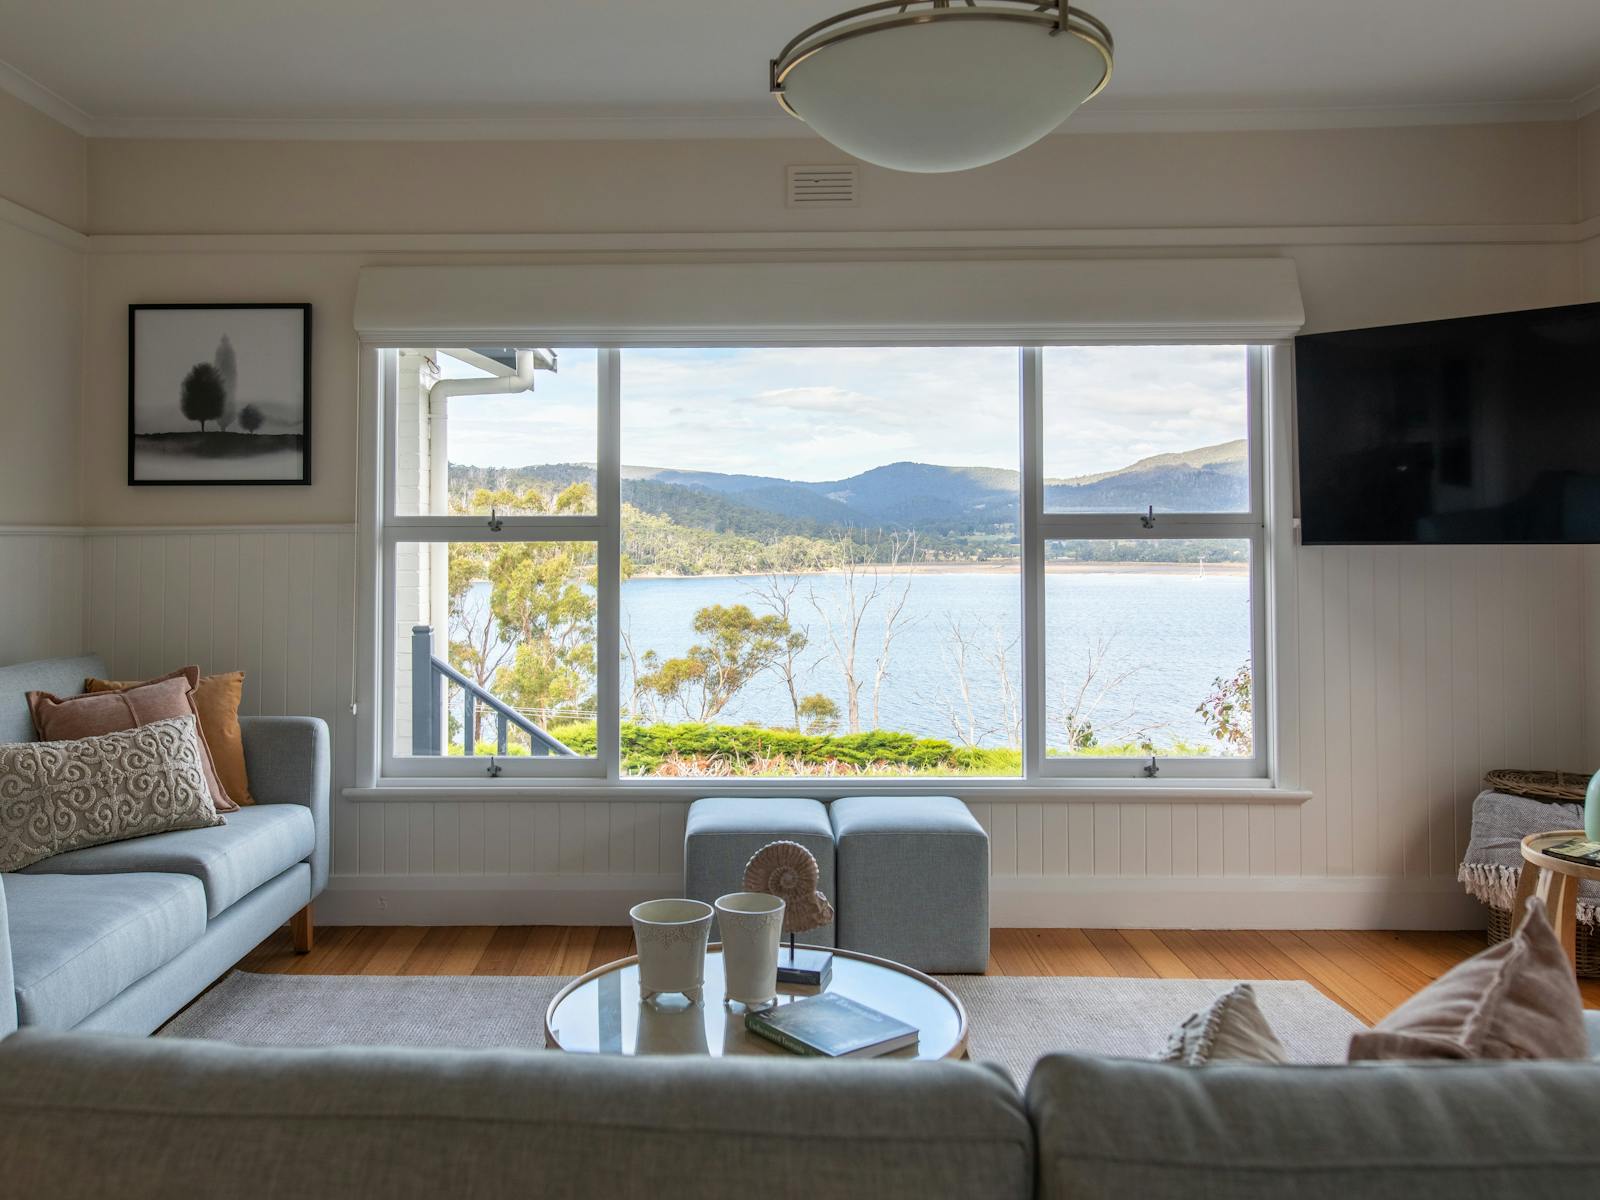 Image of a living room with a couch, tv and view over the bay